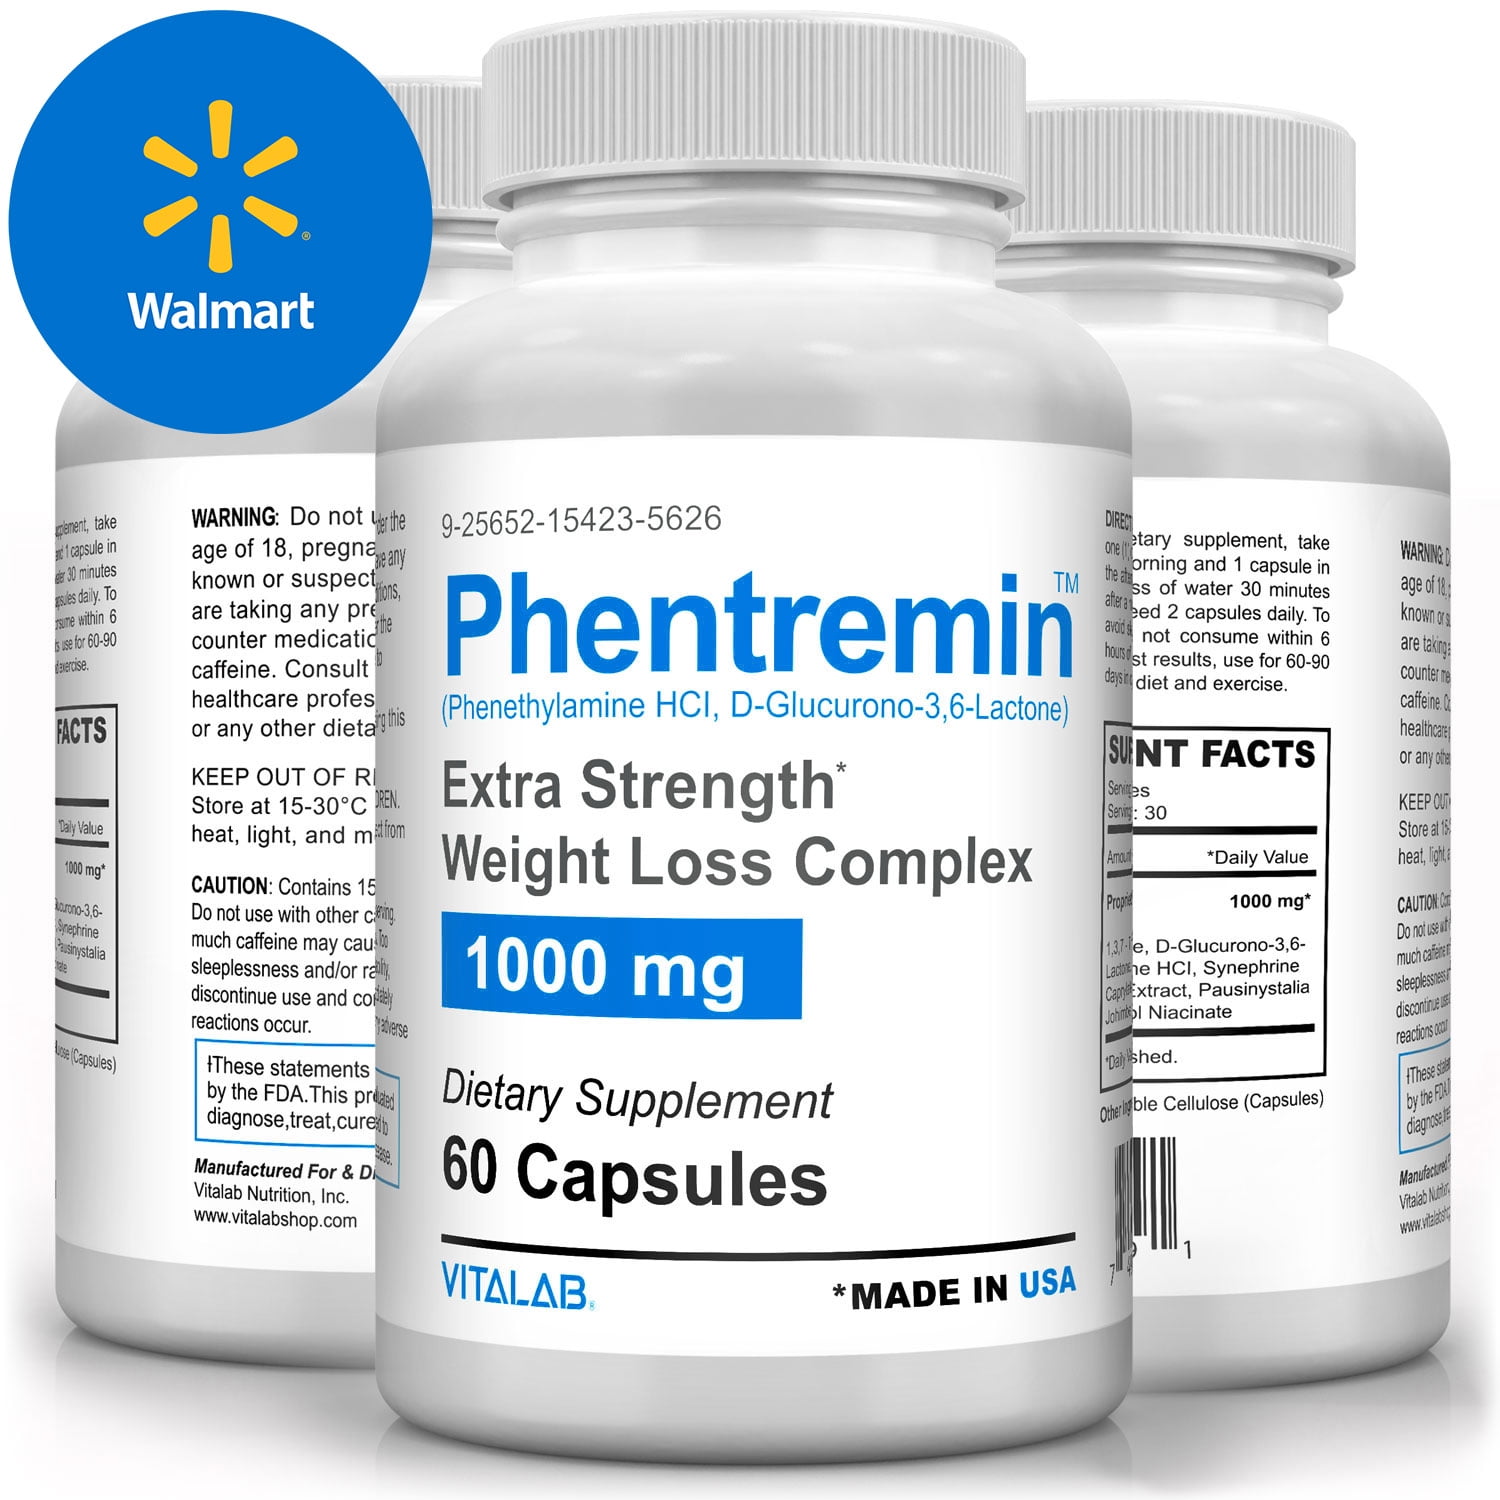 Phen1000mg Pharmaceutical Grade 37.5 Diet Pills in Health Extreme Strength Weight Loss Pills Fat Burner Best Appetite Suppressant 60 Capsules